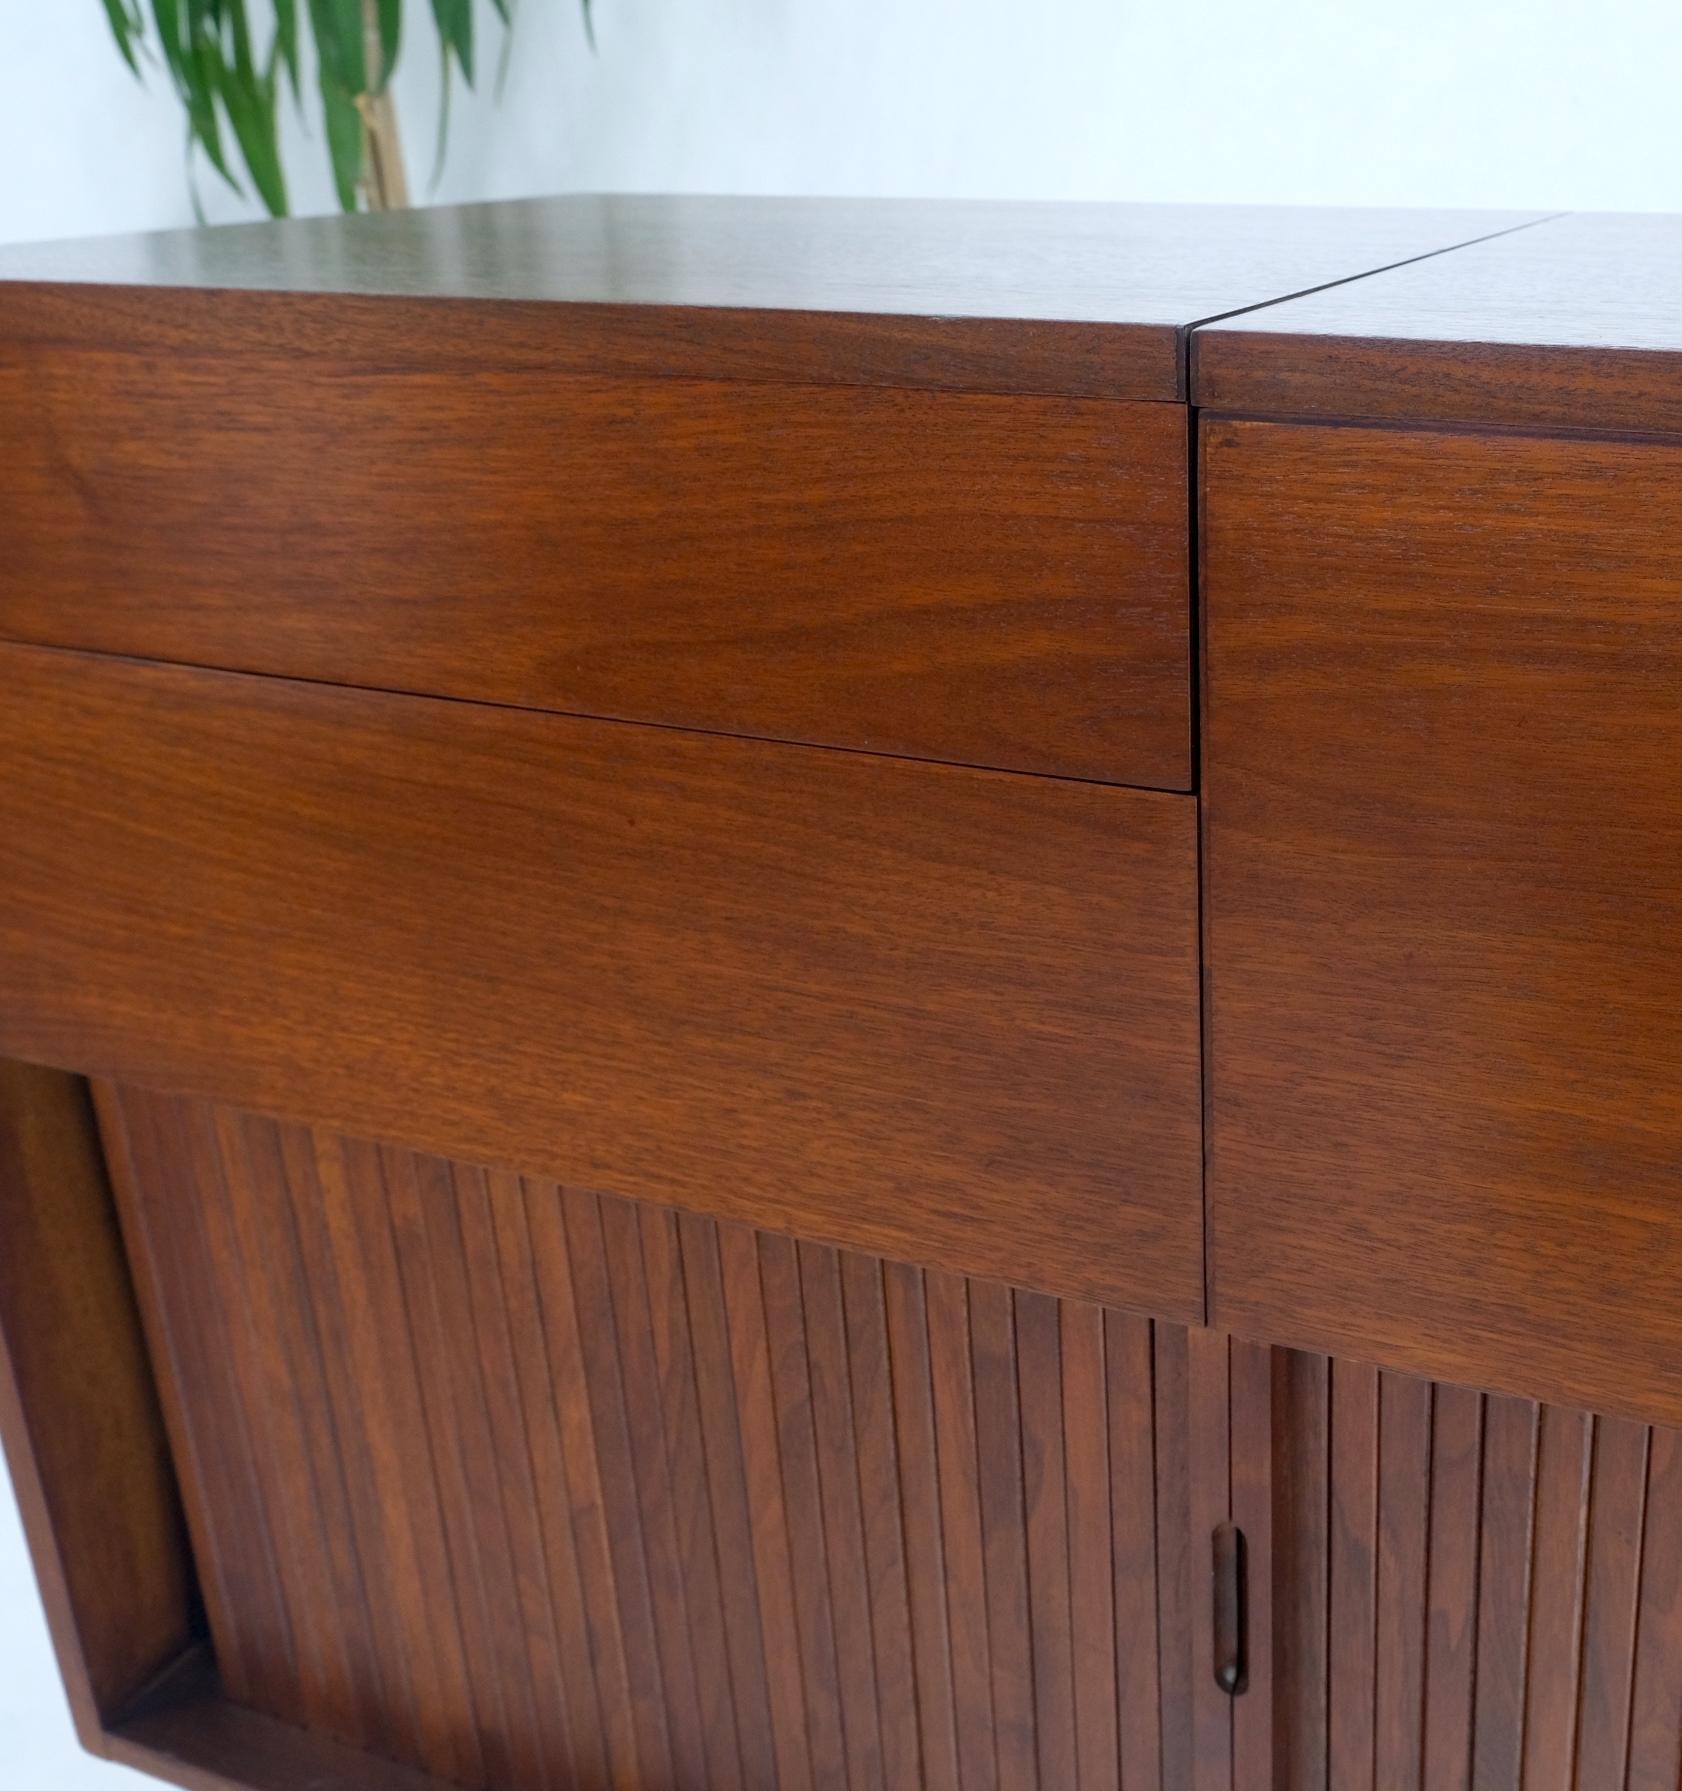 Lacquered Restored Lift Top Turn Table Record Cabinet Credenza Tambour Door Compartment